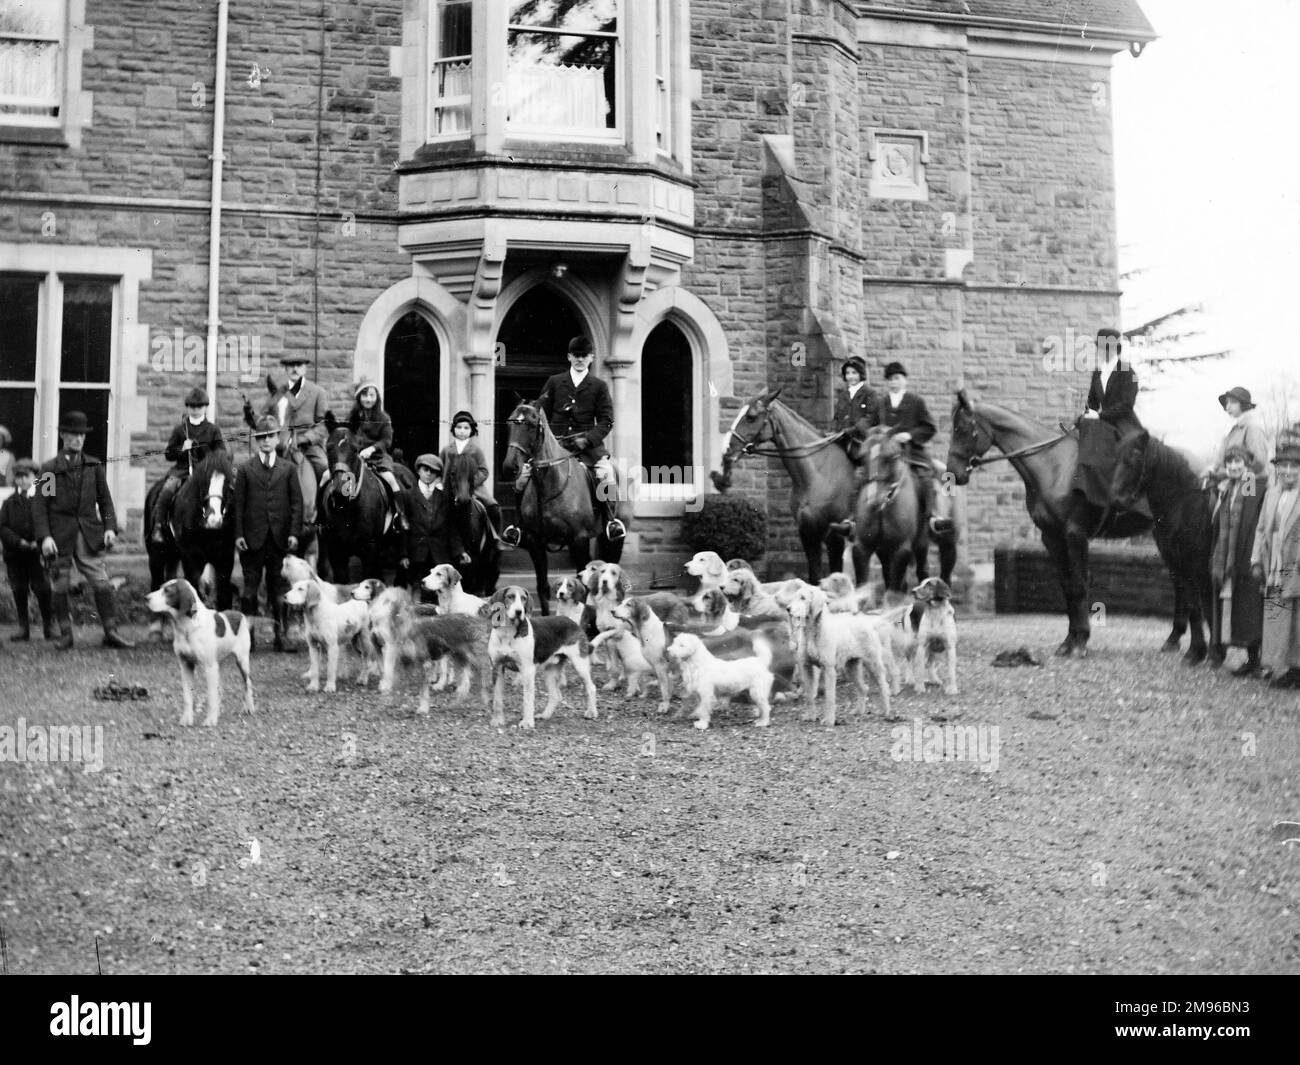 Members of the Crickhowell Harriers Hunt with horses and hounds in Powys, Mid Wales.  The building in the background is possibly the Old Rectory in the nearby village of Llangattock. Stock Photo